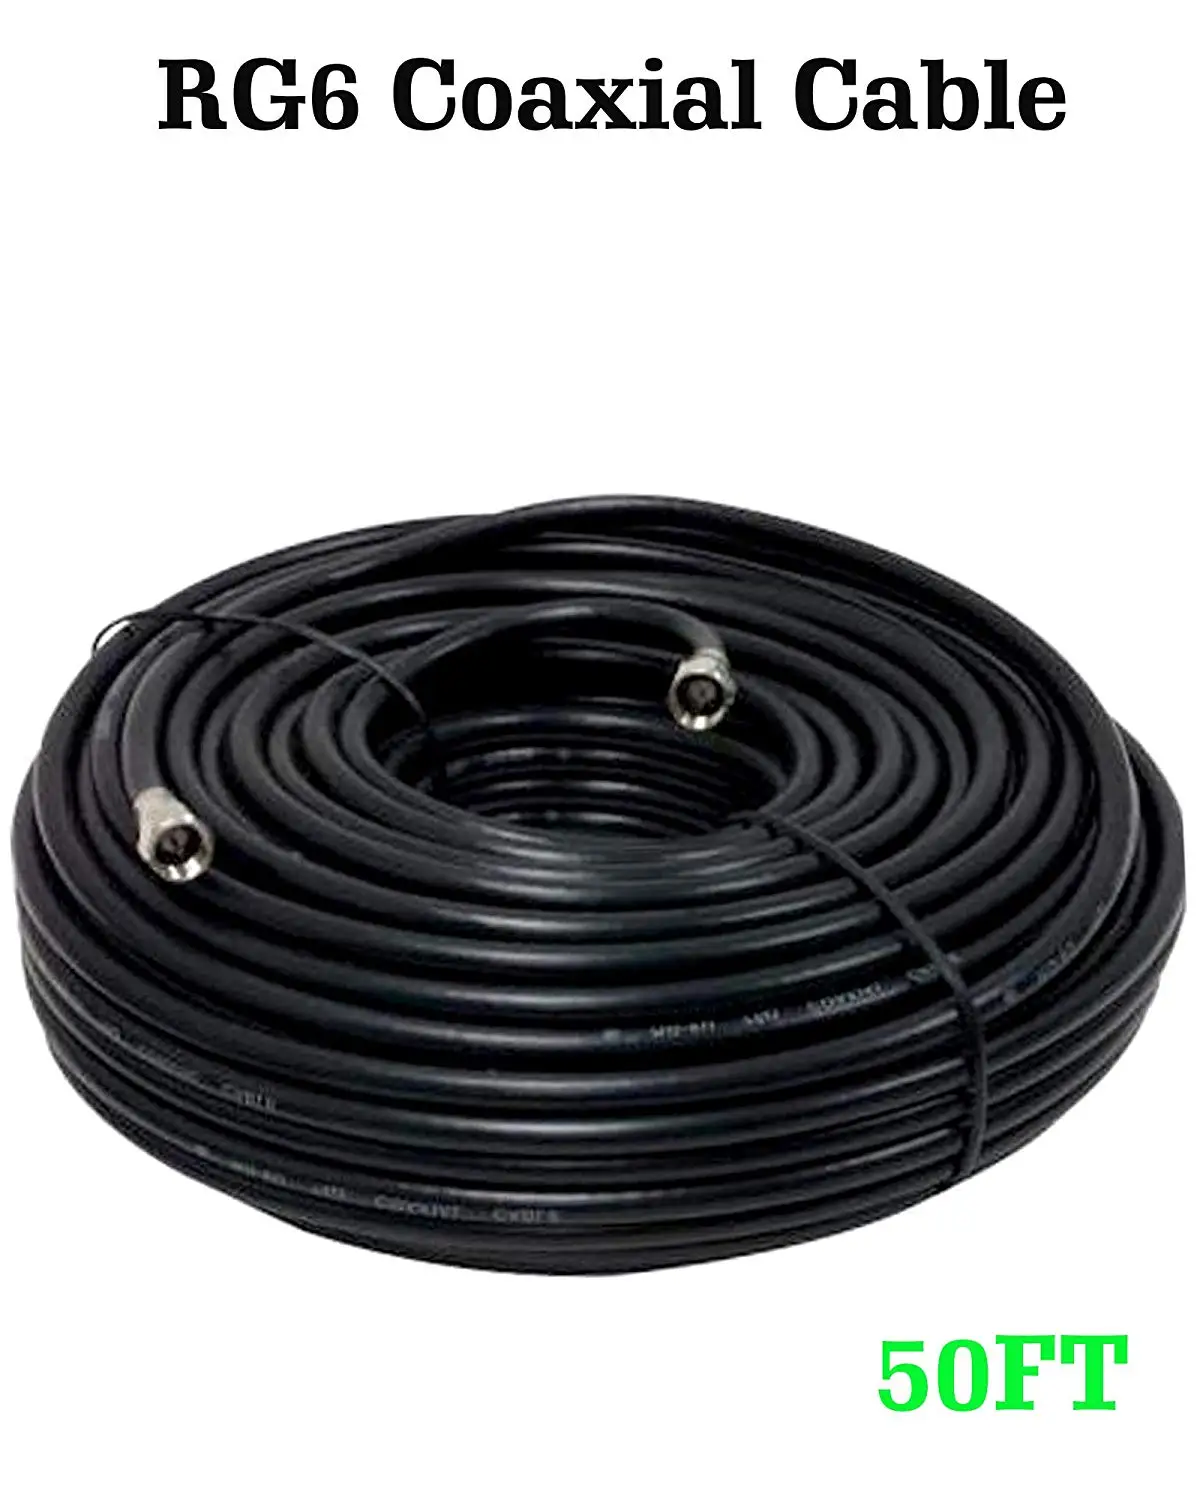 Buy Rg6 1000ft Dual Shield Coaxial Cable 18 Awg Copper Clad Steel 